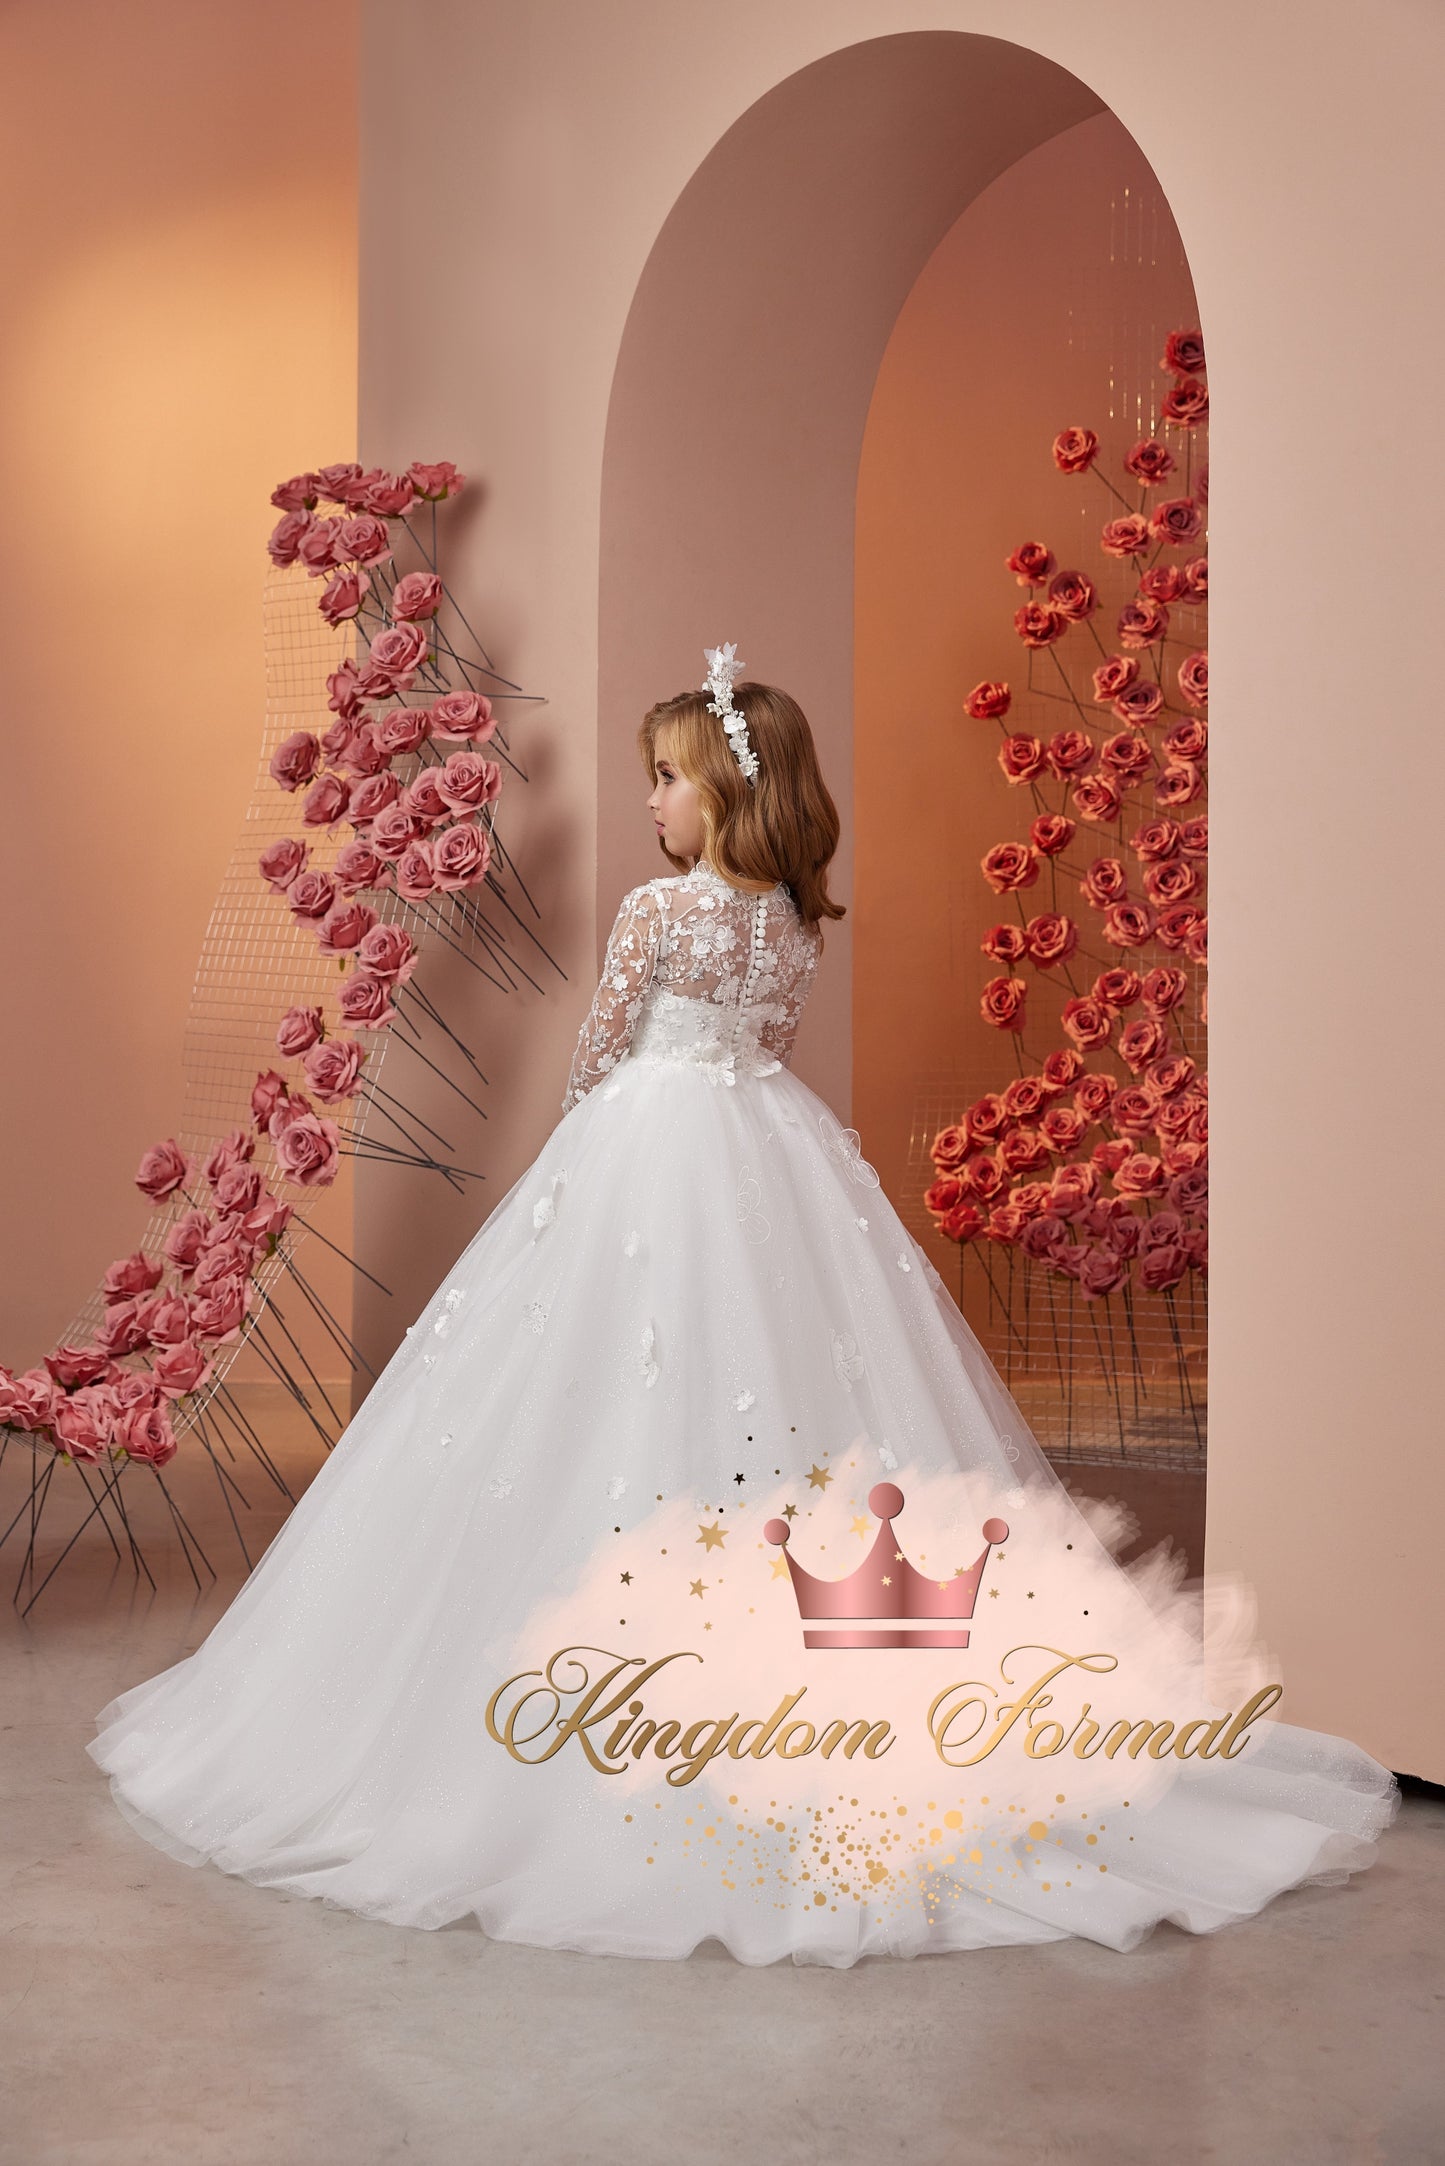 The Blossom Gown